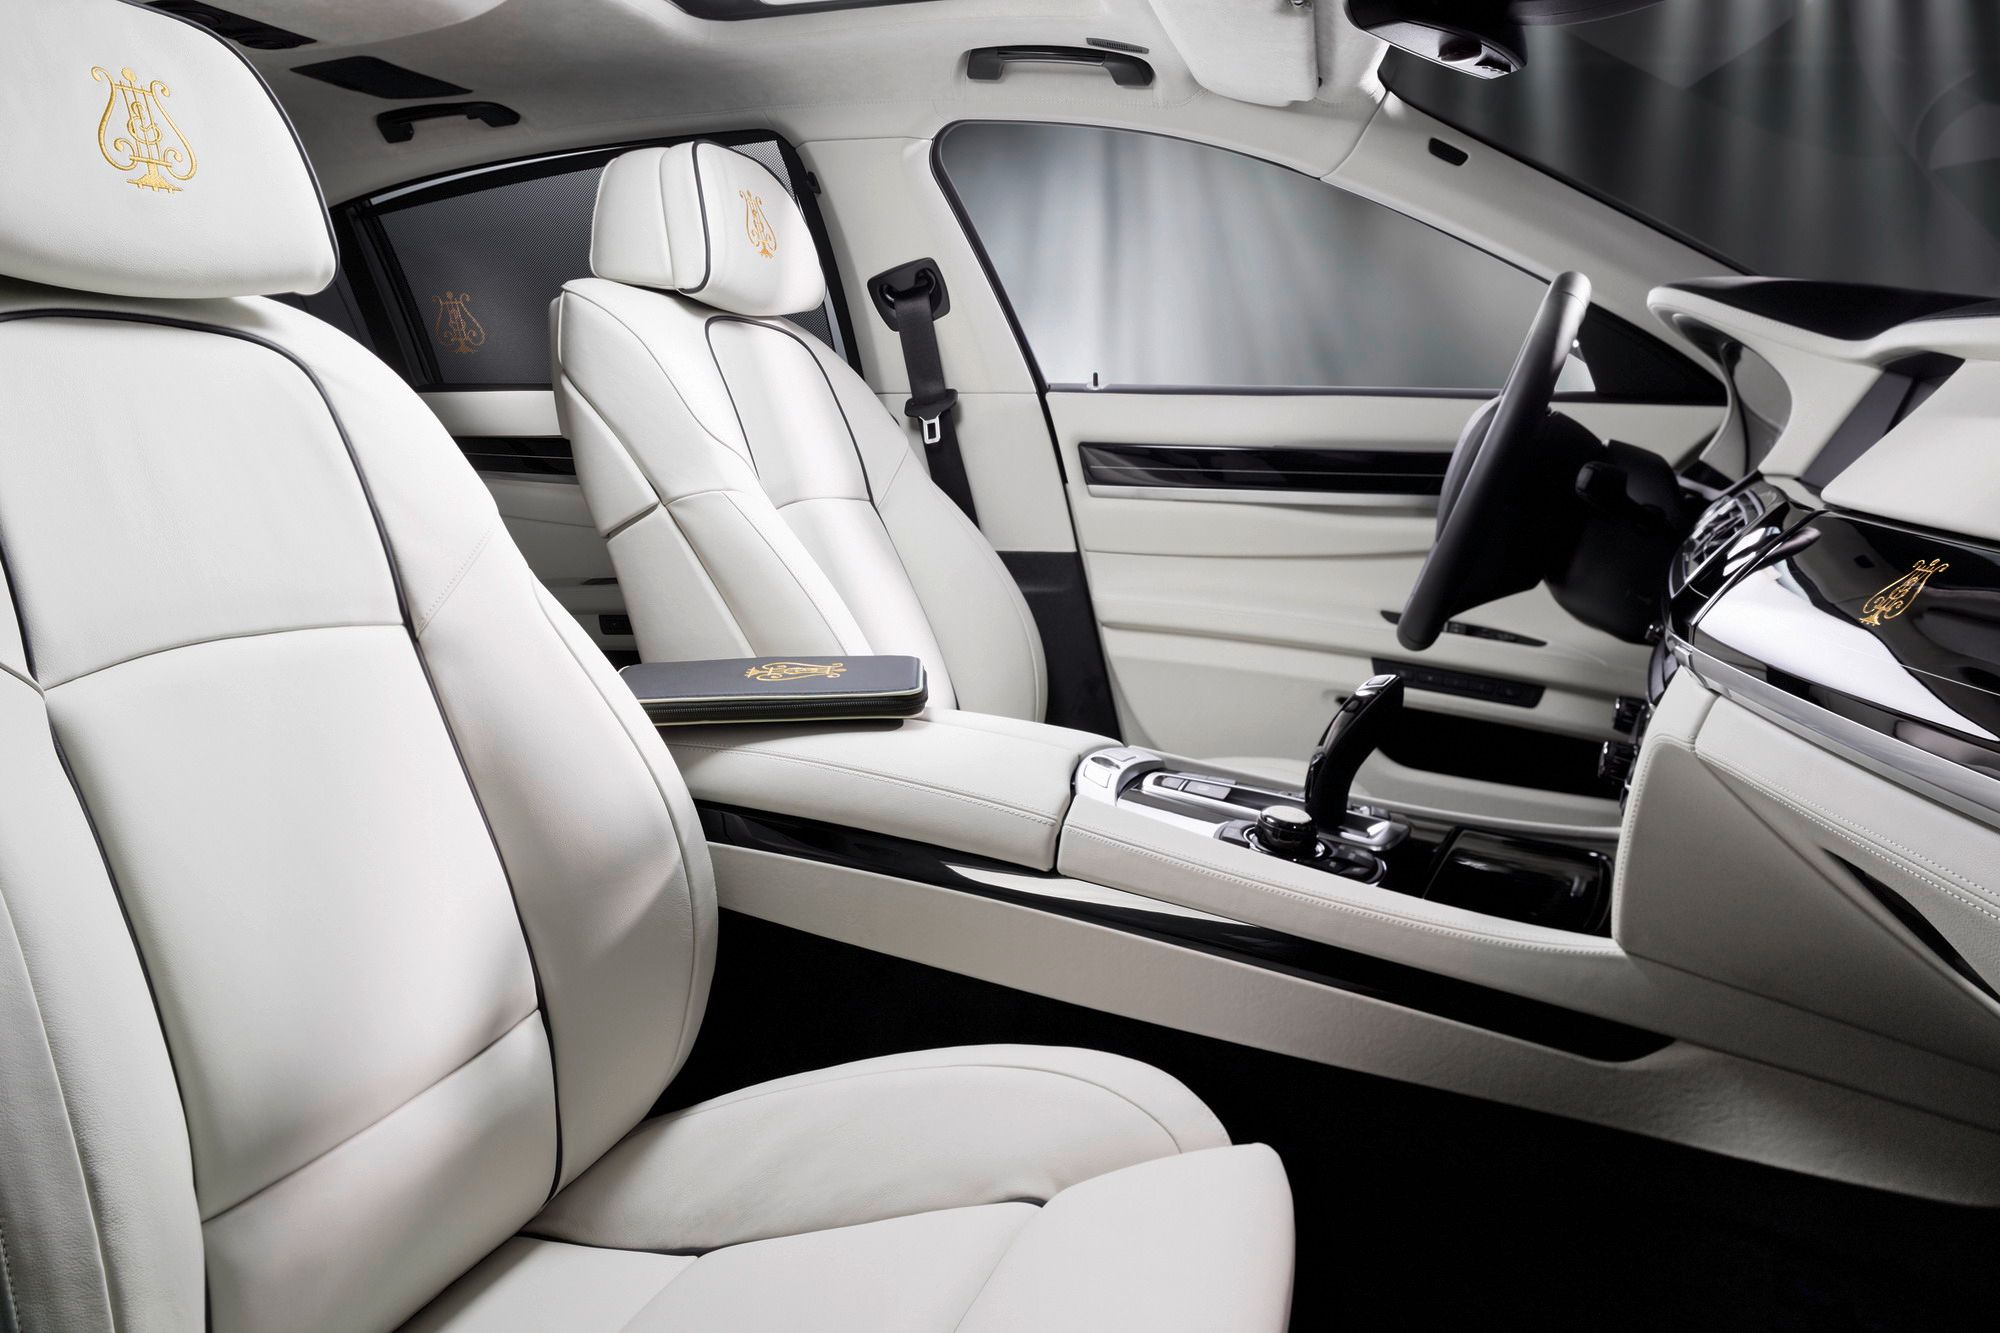 2010 BMW Individual 7 Series Composition